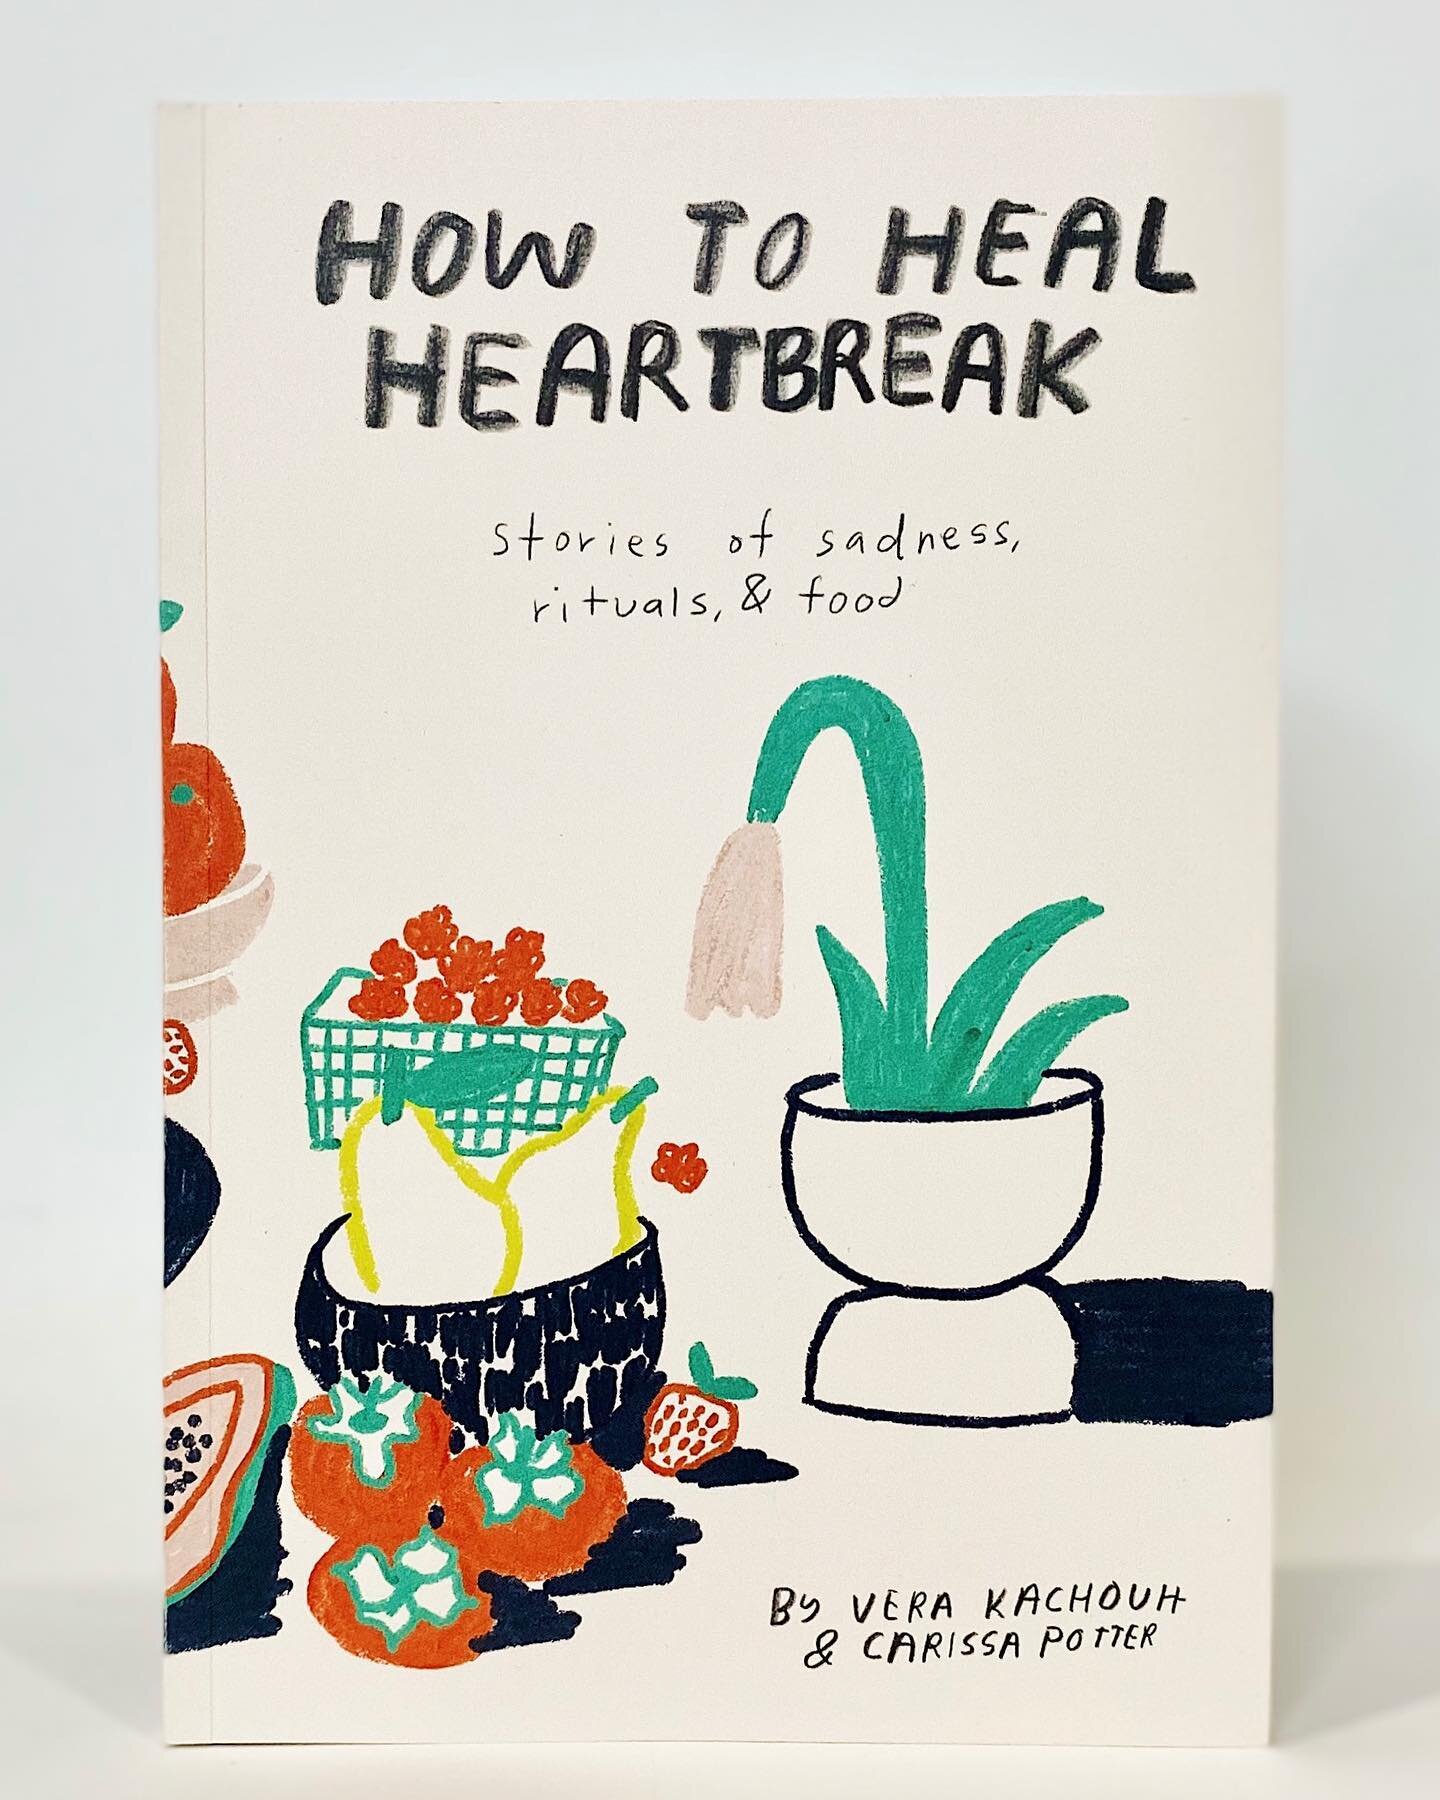 We wrote a book, @peopleiveloved and me. It features our most embarrassing breakup memories, recipes, sketches, meditations, and exercises for healing. We cried our eyes out writing this... revisiting it all.

We wanted to launch it for Valentine's D